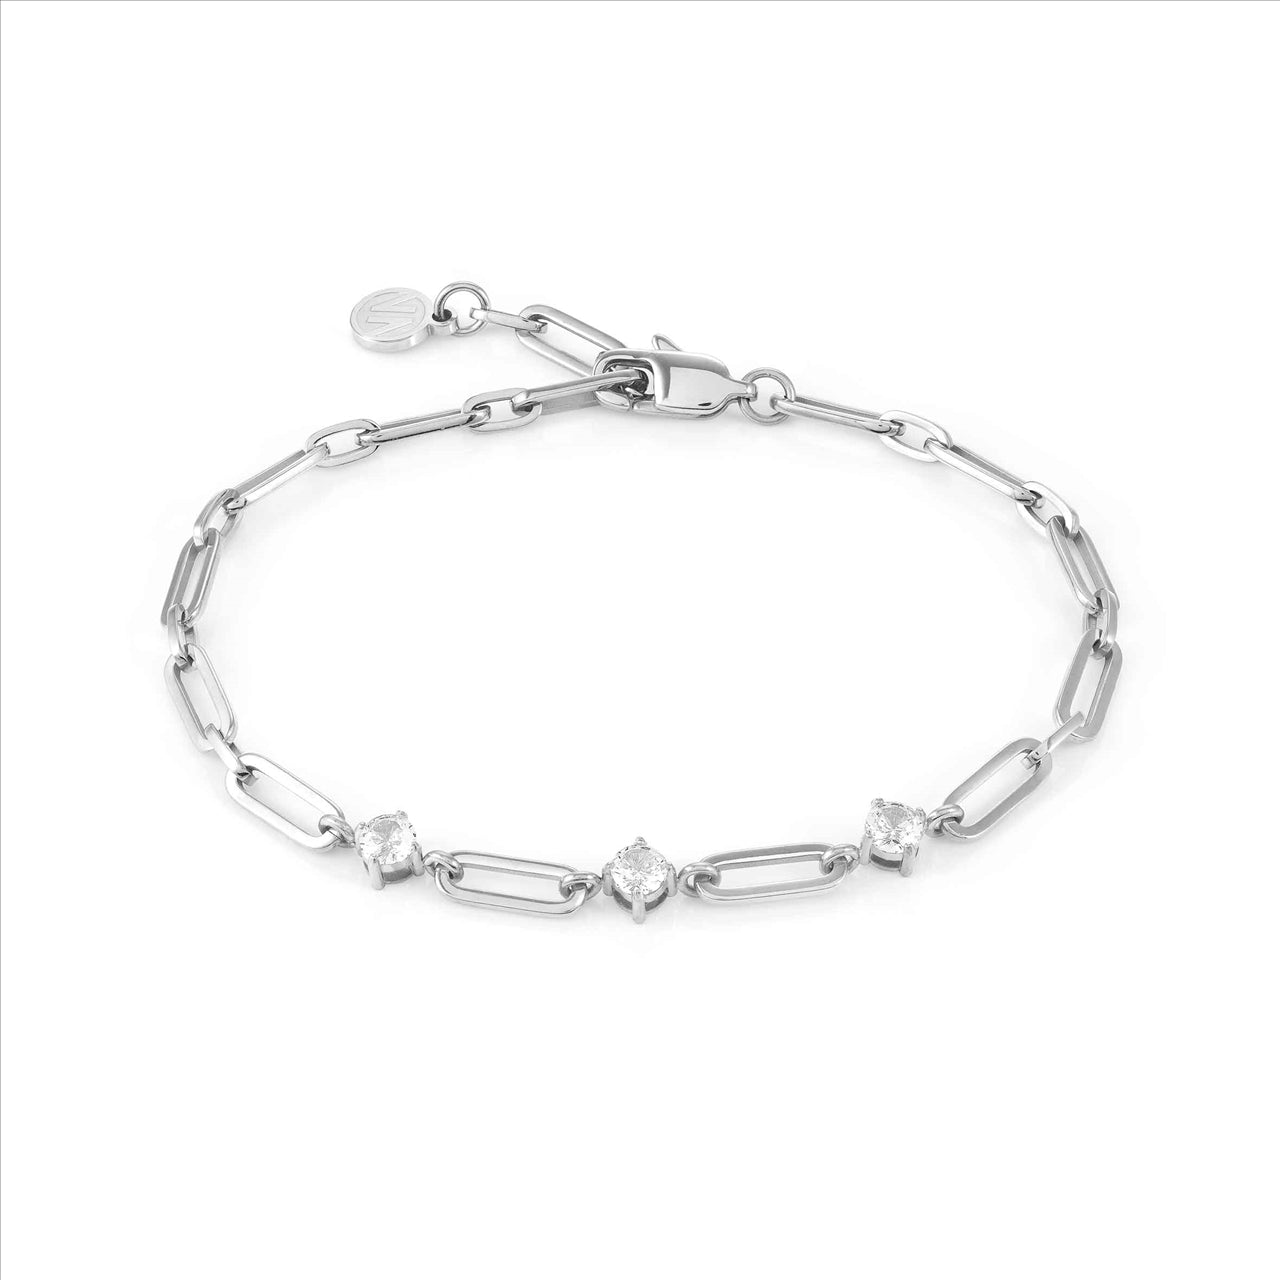 NOMINATION 'Chain of Style' Stainless Steel and CZ Bracelet – Myatt ...